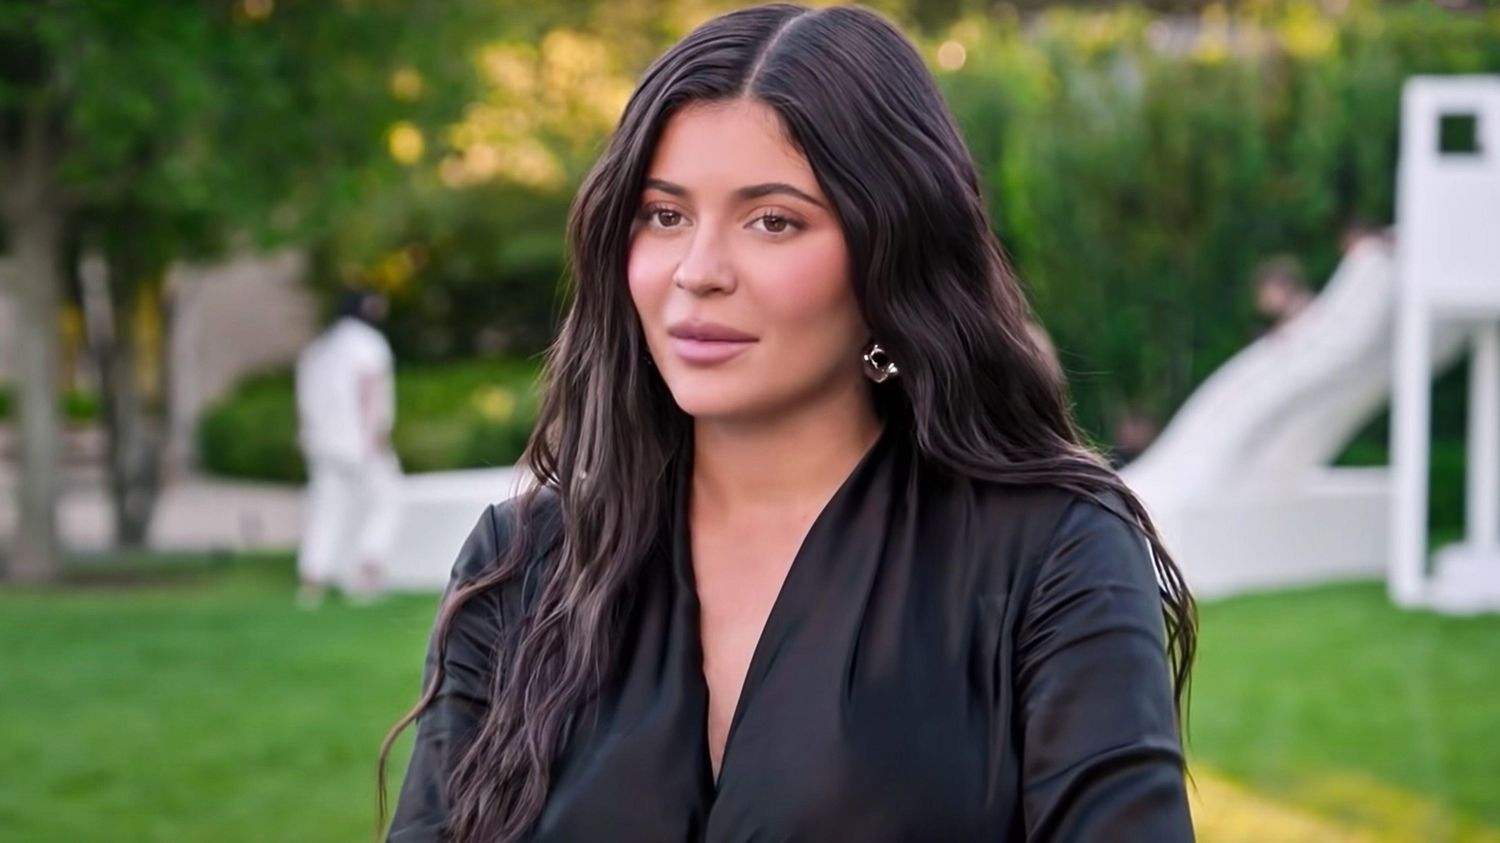 Kylie Jenner fans think her son's new name is Jacob